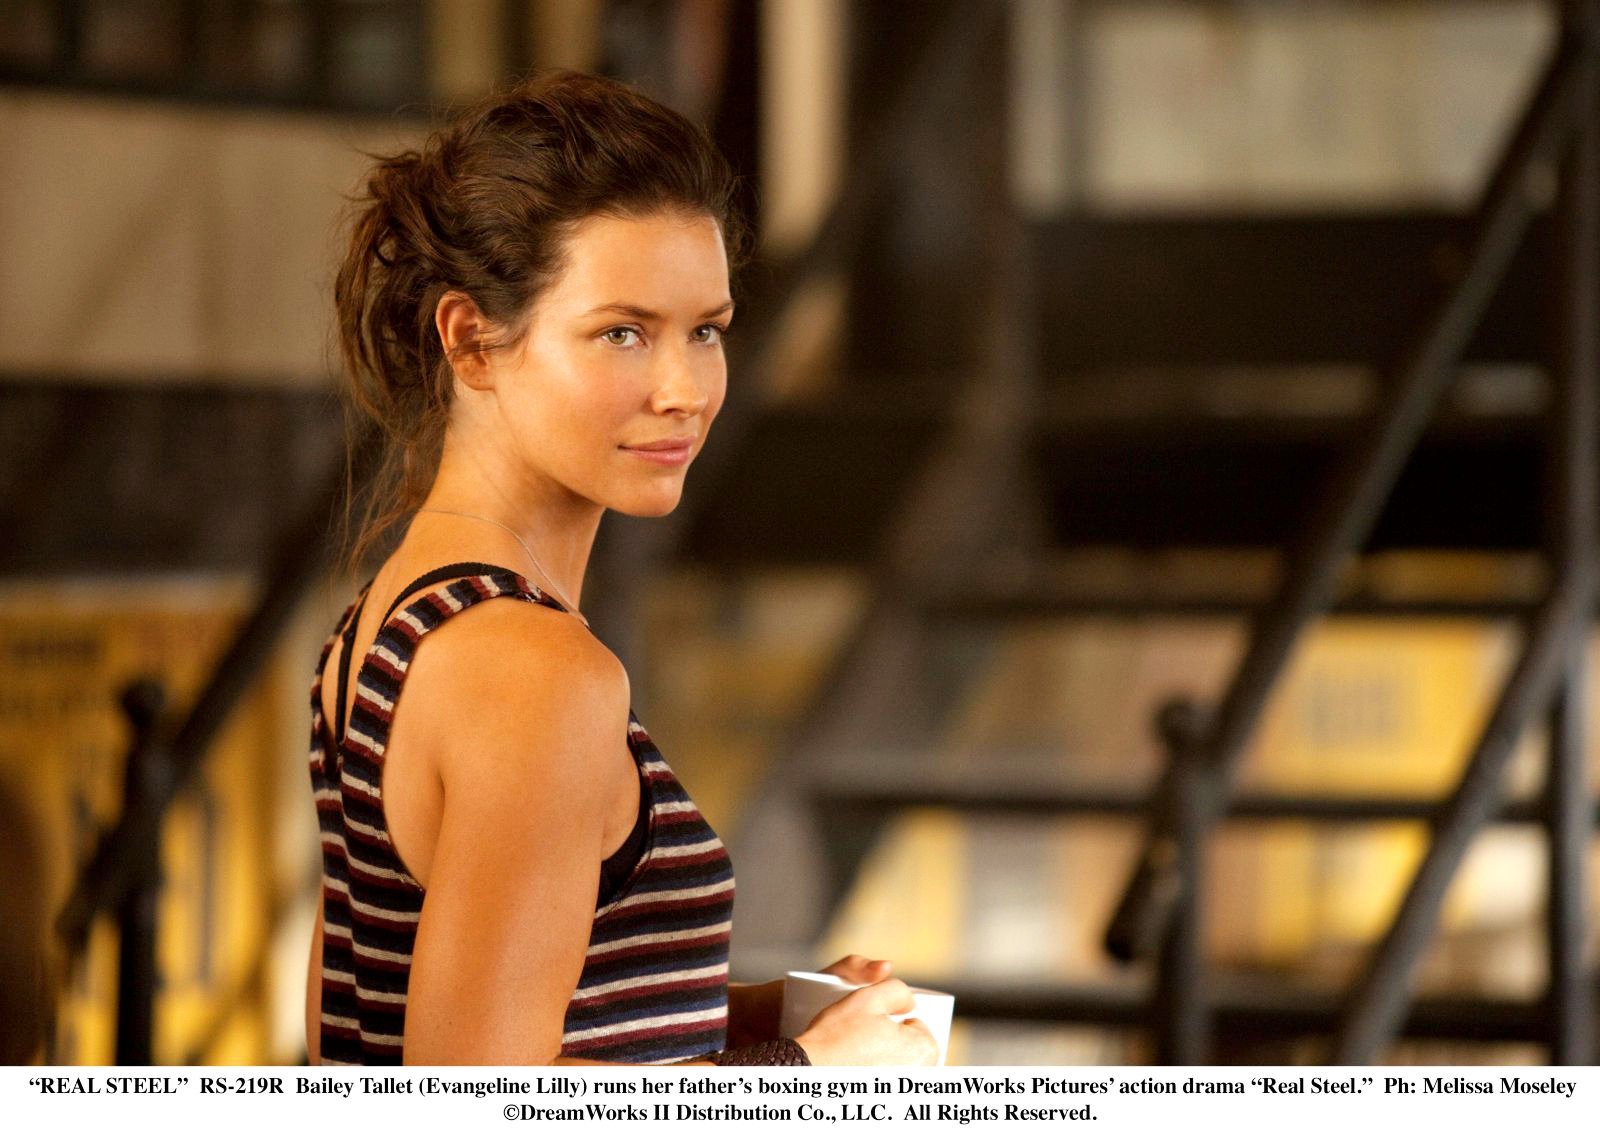 Evangeline Lilly stars as Bailey Tallet in Walt Disney Pictures' Real Steel (2011). Photo credit by Melissa Moseley.